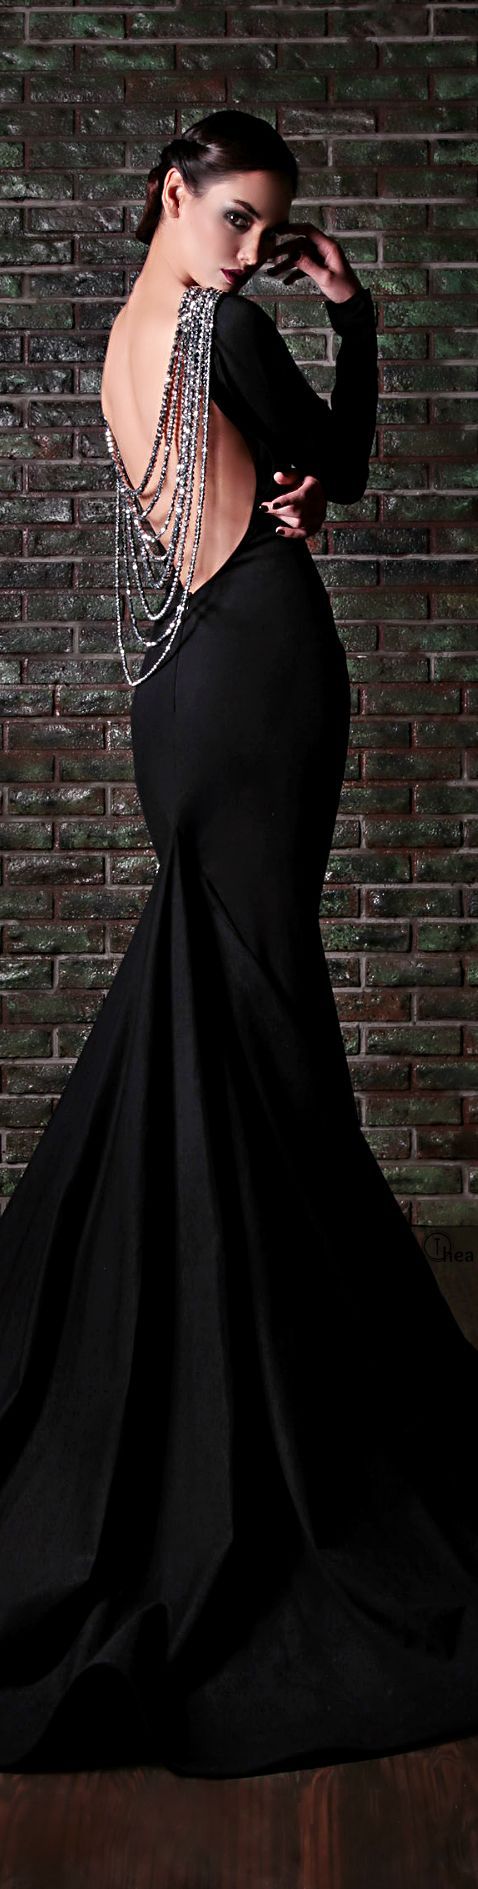 13 Most Beautiful Long Black Dresses From RAMI KADI, click to see all–I’ll wear this one when you’re supe